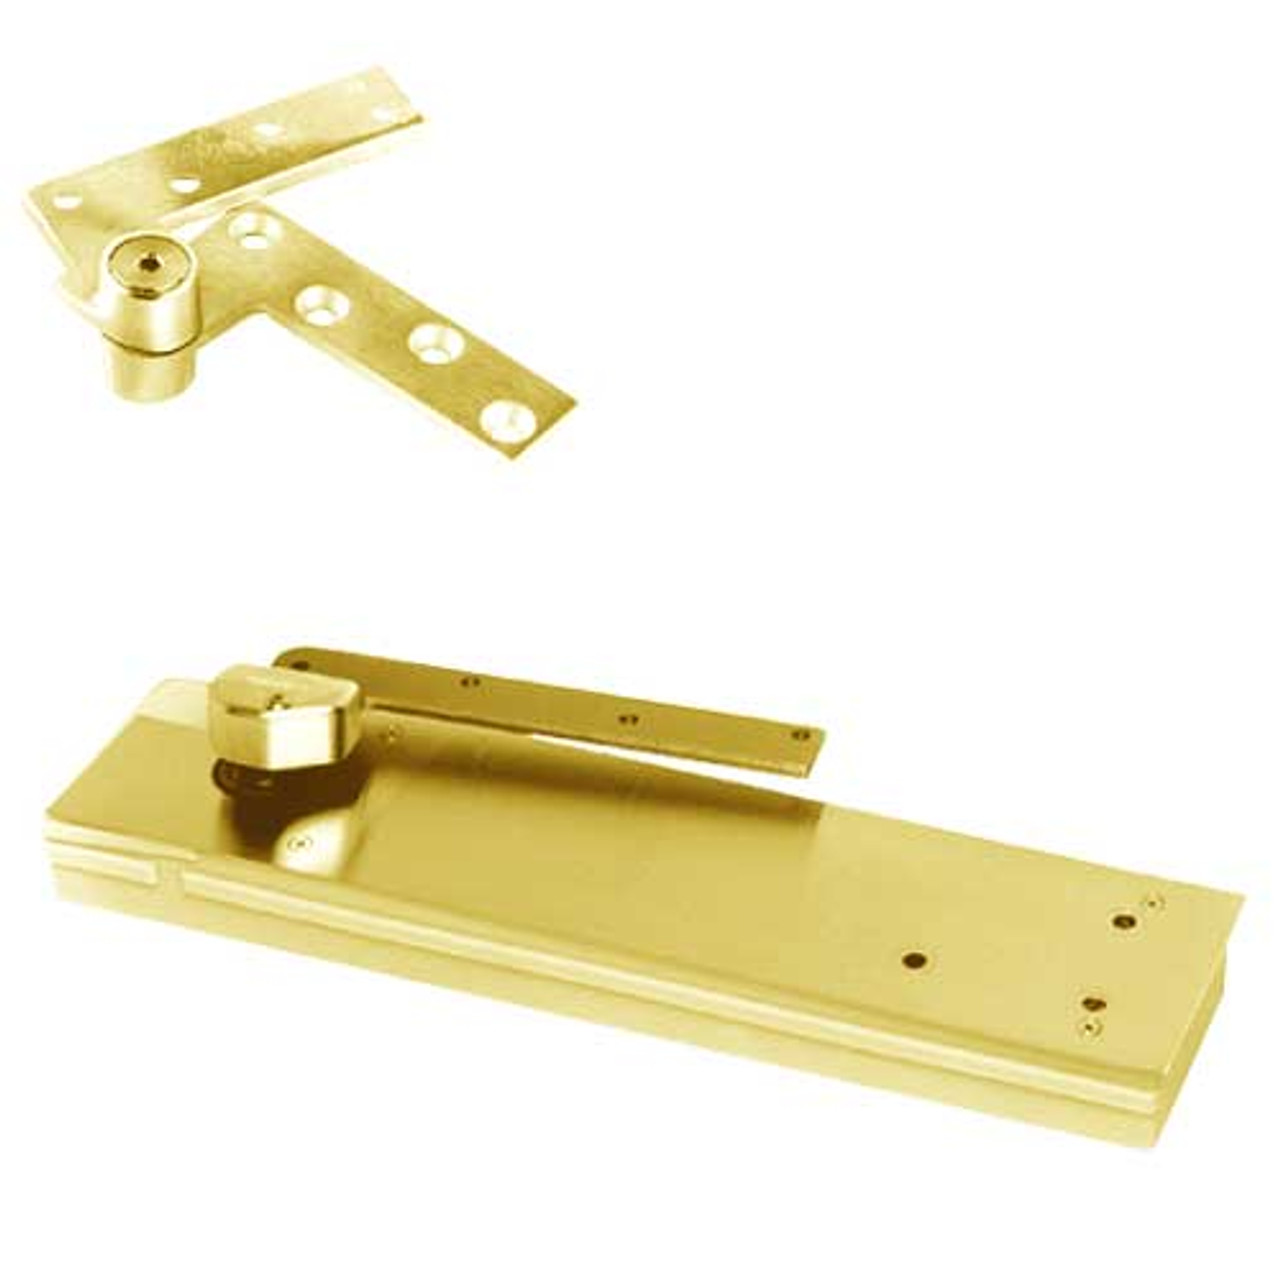 F5104NBC-1-1/2OS-RH-605 Rixson 51 Series 1-1/2" Offset Hung Shallow Depth Floor Closers in Bright Brass Finish